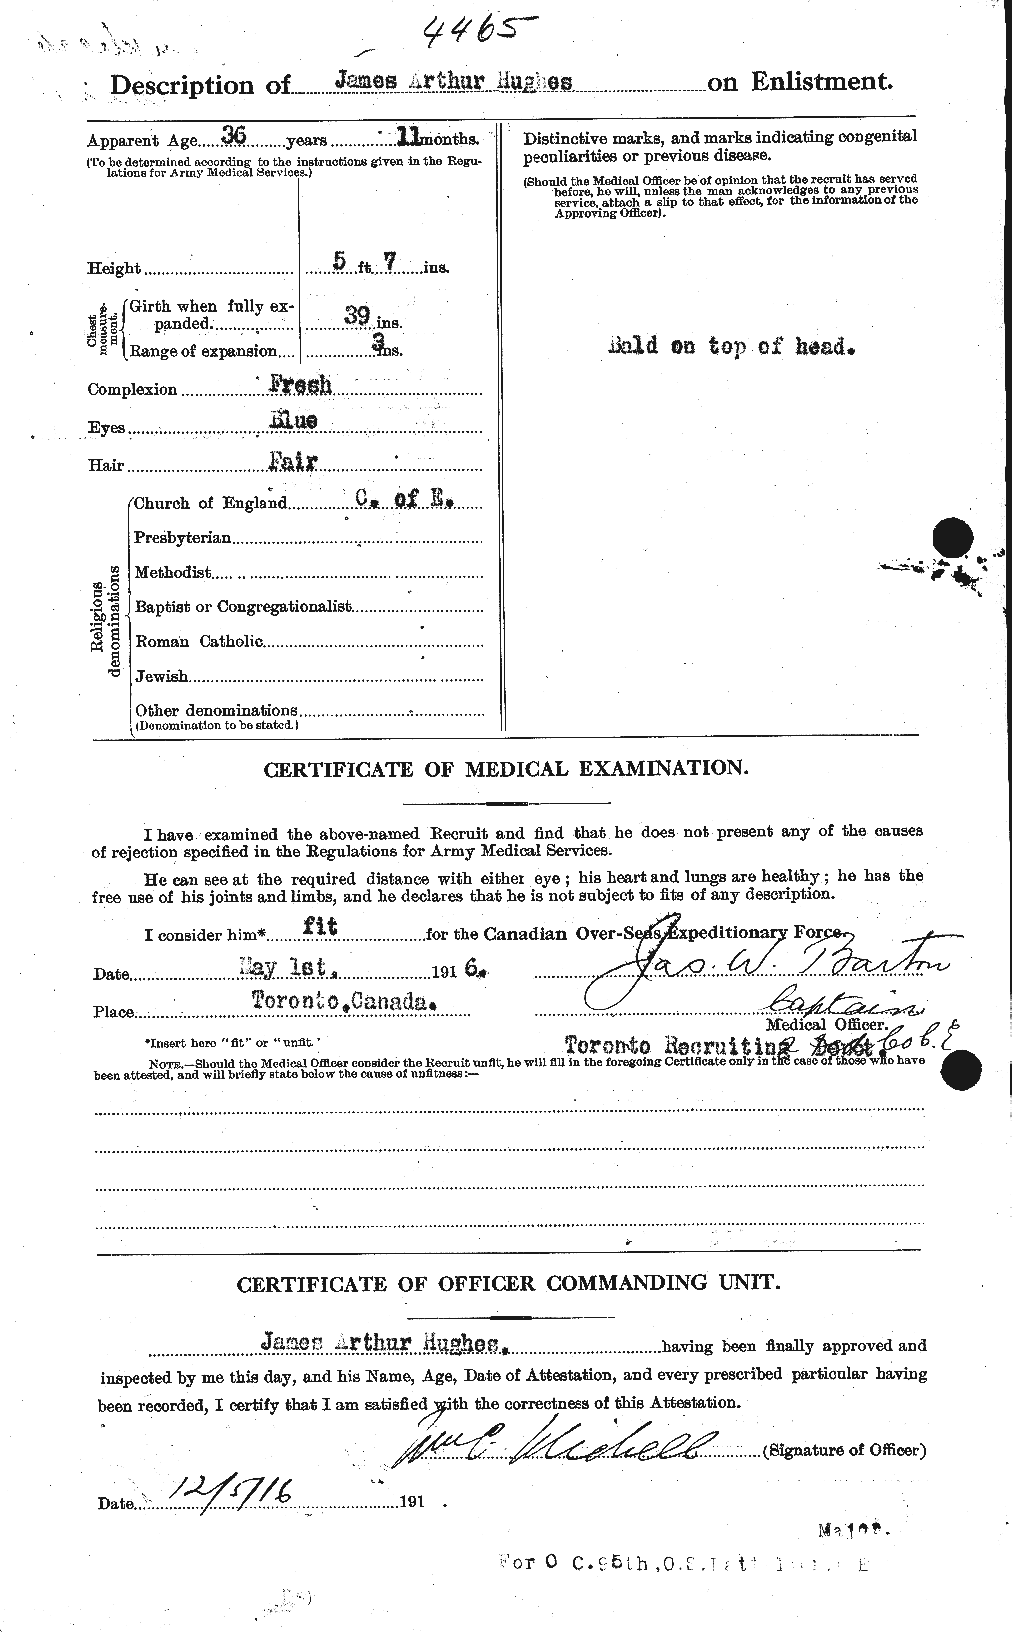 Personnel Records of the First World War - CEF 403956b